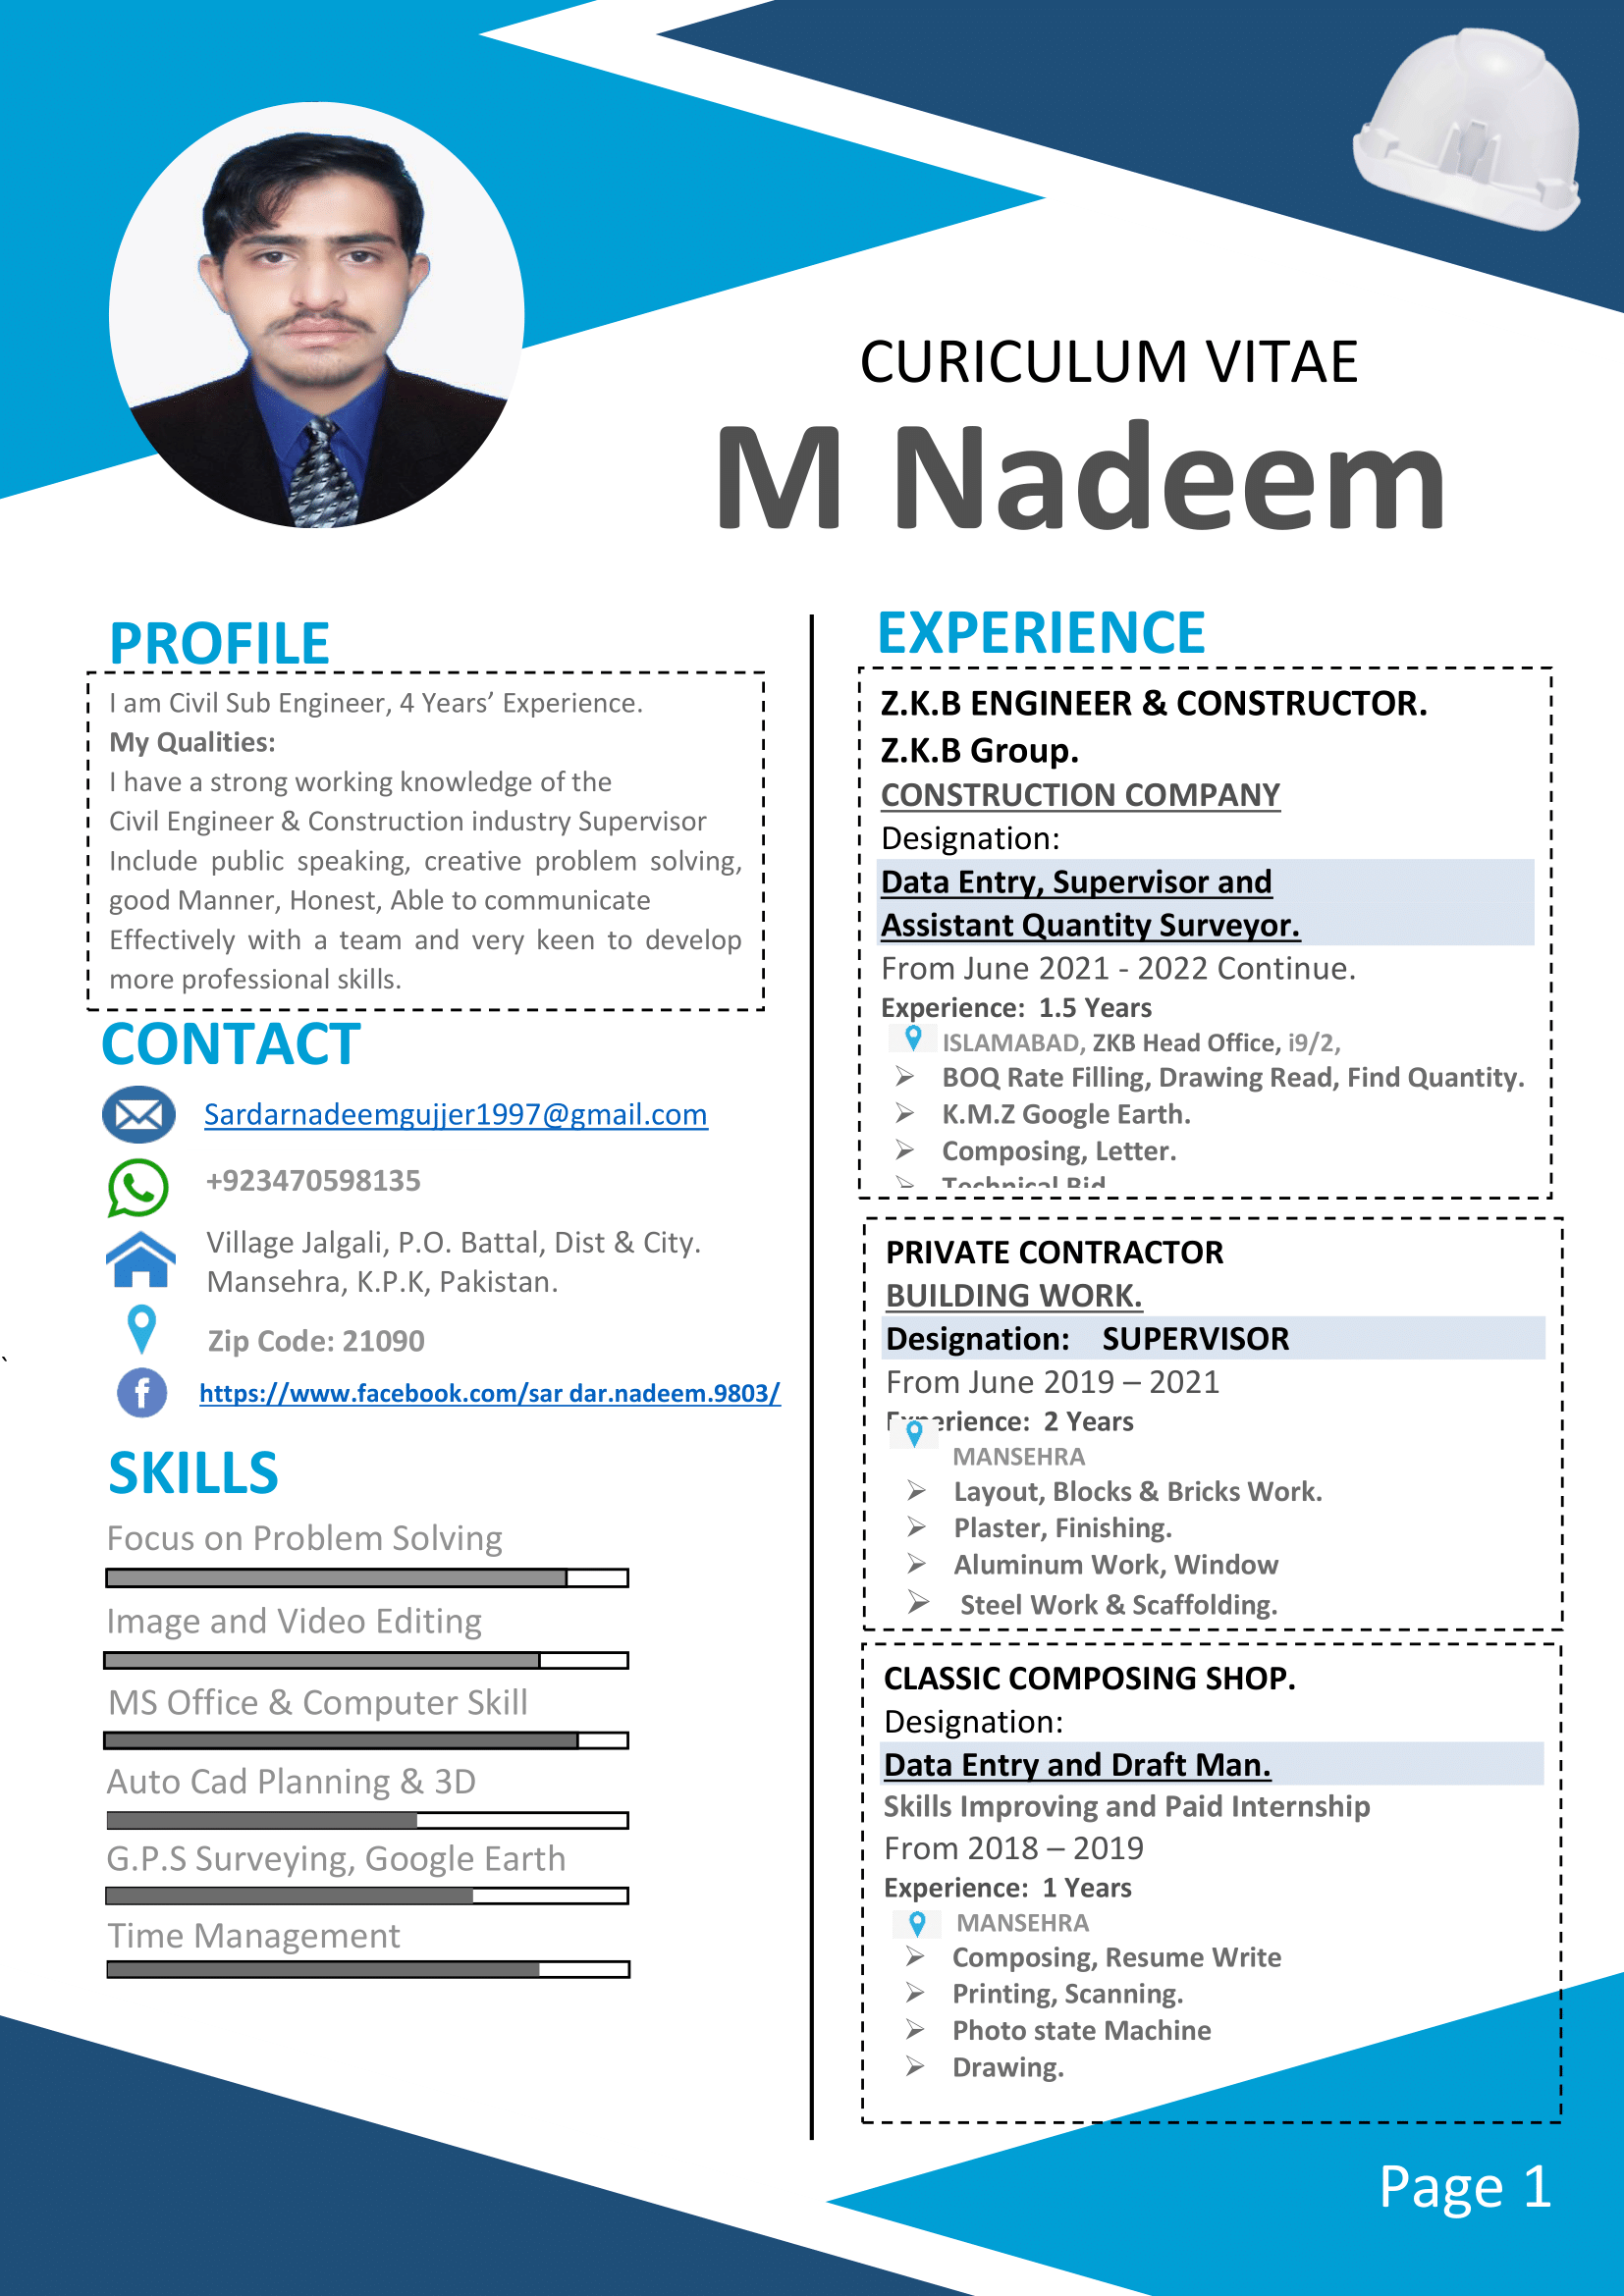 CURICULUM VITAE

M Nadeem

PROFILE EXPERIENCE

I'am Civil Sub Engineer, 4 Years’ Experience.

My Qualities:

I have a strong working knowledge of the

Civil Engineer &amp; Construction industry Supervisor
Include public speaking, creative problem solving,
good Manner, Honest, Able to communicate
Effectively with a team and very keen to develop

Z.K.B ENGINEER &amp; CONSTRUCTOR.
' Z.K.B Group. ‘
i CONSTRUCTION COMPANY
Designation: !
' Data Entry, Supervisor and ,
1 Assistant Quantity Surveyor.
|
I 1
i
' 1
' 1
1 1
|
I 1

From June 2021 - 2022 Continue.
Experience: 1.5 Years
9 ISLAMABAD, ZKB Head Office, i9/2,

more professional skills.

» BOQ Rate Filling, Drawing Read, Find Quantity.
SD Sardarnadeemguijjer1997 @gmail.com » K.M.Z Google Earth.

» Composing, Letter.
+923470598135

 

PRIVATE CONTRACTOR
BUILDING WORK.
Designation: SUPERVISOR
From June 2019 - 2021

1

1

Mansehra, K.P.K, Pakistan. '
1

1

1

|

Mg rience: 2 Years '
1

1

1

1

1

1

1

1

1

1

a Village Jalgali, P.O. Battal, Dist &amp; City.

Zip Code: 21090
oO https://www.facebook.com/sar dar.nadeem.9803/

SKILLS

Focus on Problem Solving

 

MANSEHRA
» Layout, Blocks &amp; Bricks Work.
» Plaster, Finishing.
» Aluminum Work, Window
» Steel Work &amp; Scaffolding.
i CLASSIC COMPOSING SHOP.
Designation:
, Data Entry and Draft Man.
1 Skills Improving and Paid Internship
i From 2018 - 2019
Experience: 1 Years
1
1
1
|
1
|
1
1
1
1

 

Image and Video Editing

 

MS Office &amp; Computer Skill

Auto Cad Planning &amp; 3D

G.P.S Surveying, Google Earth

Time Management 9 MANSEHRA }
Composing, Resume Write

r
» Printing, Scanning.
~
r

Photo state Machine
Drawing.